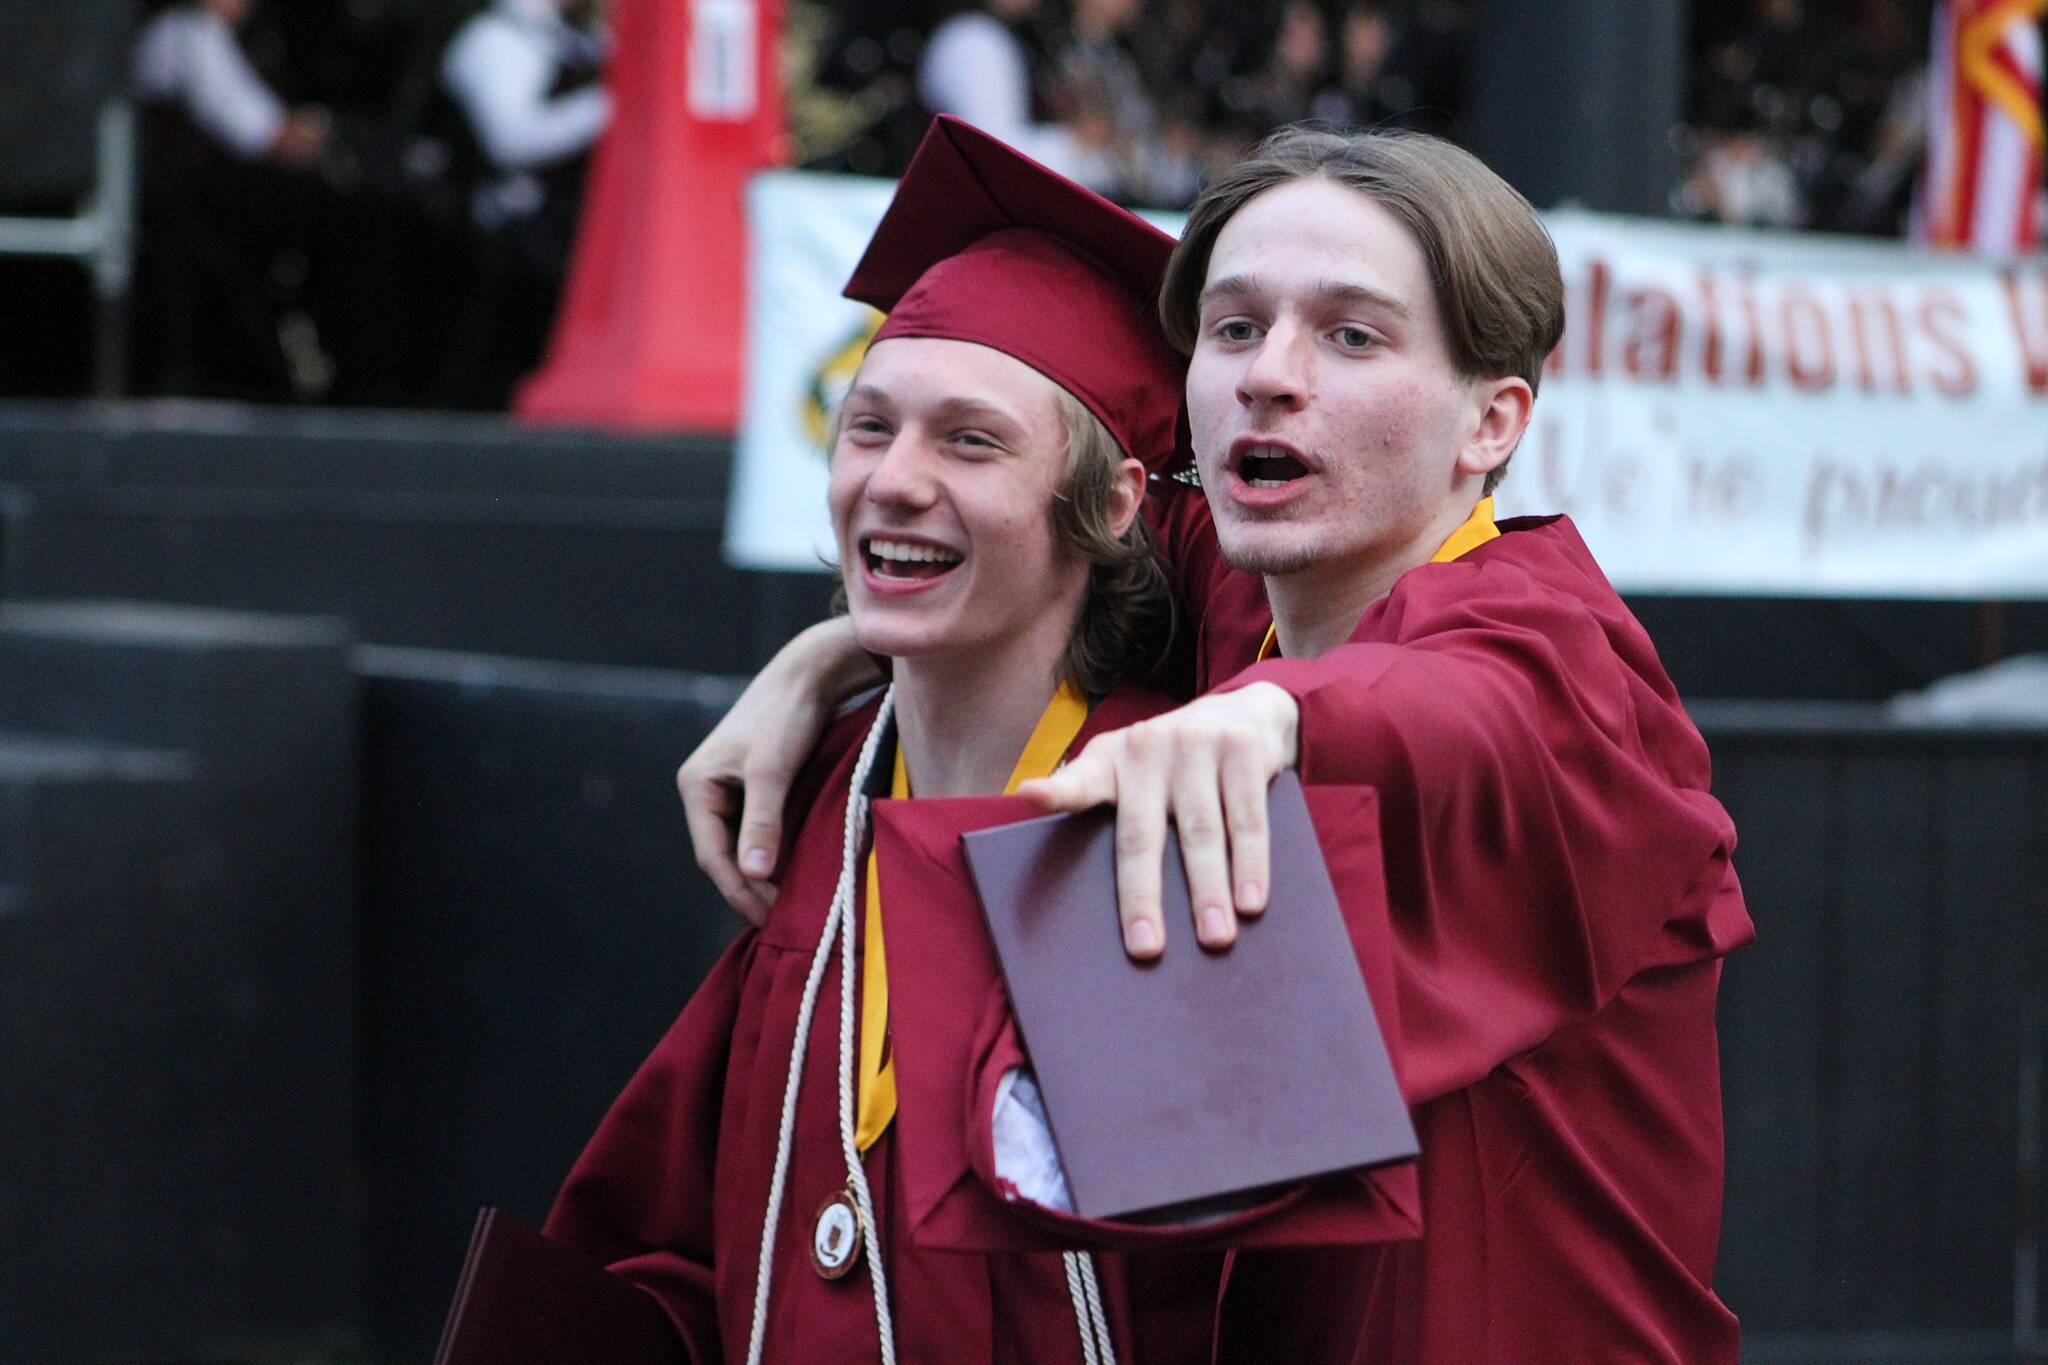 Nearly 300 White River High School students graduated this year, earning their diplomas at the Washington State Fair Grounds in Puyallup on June 8. Photos by Alex Bruell / Sound Publishing